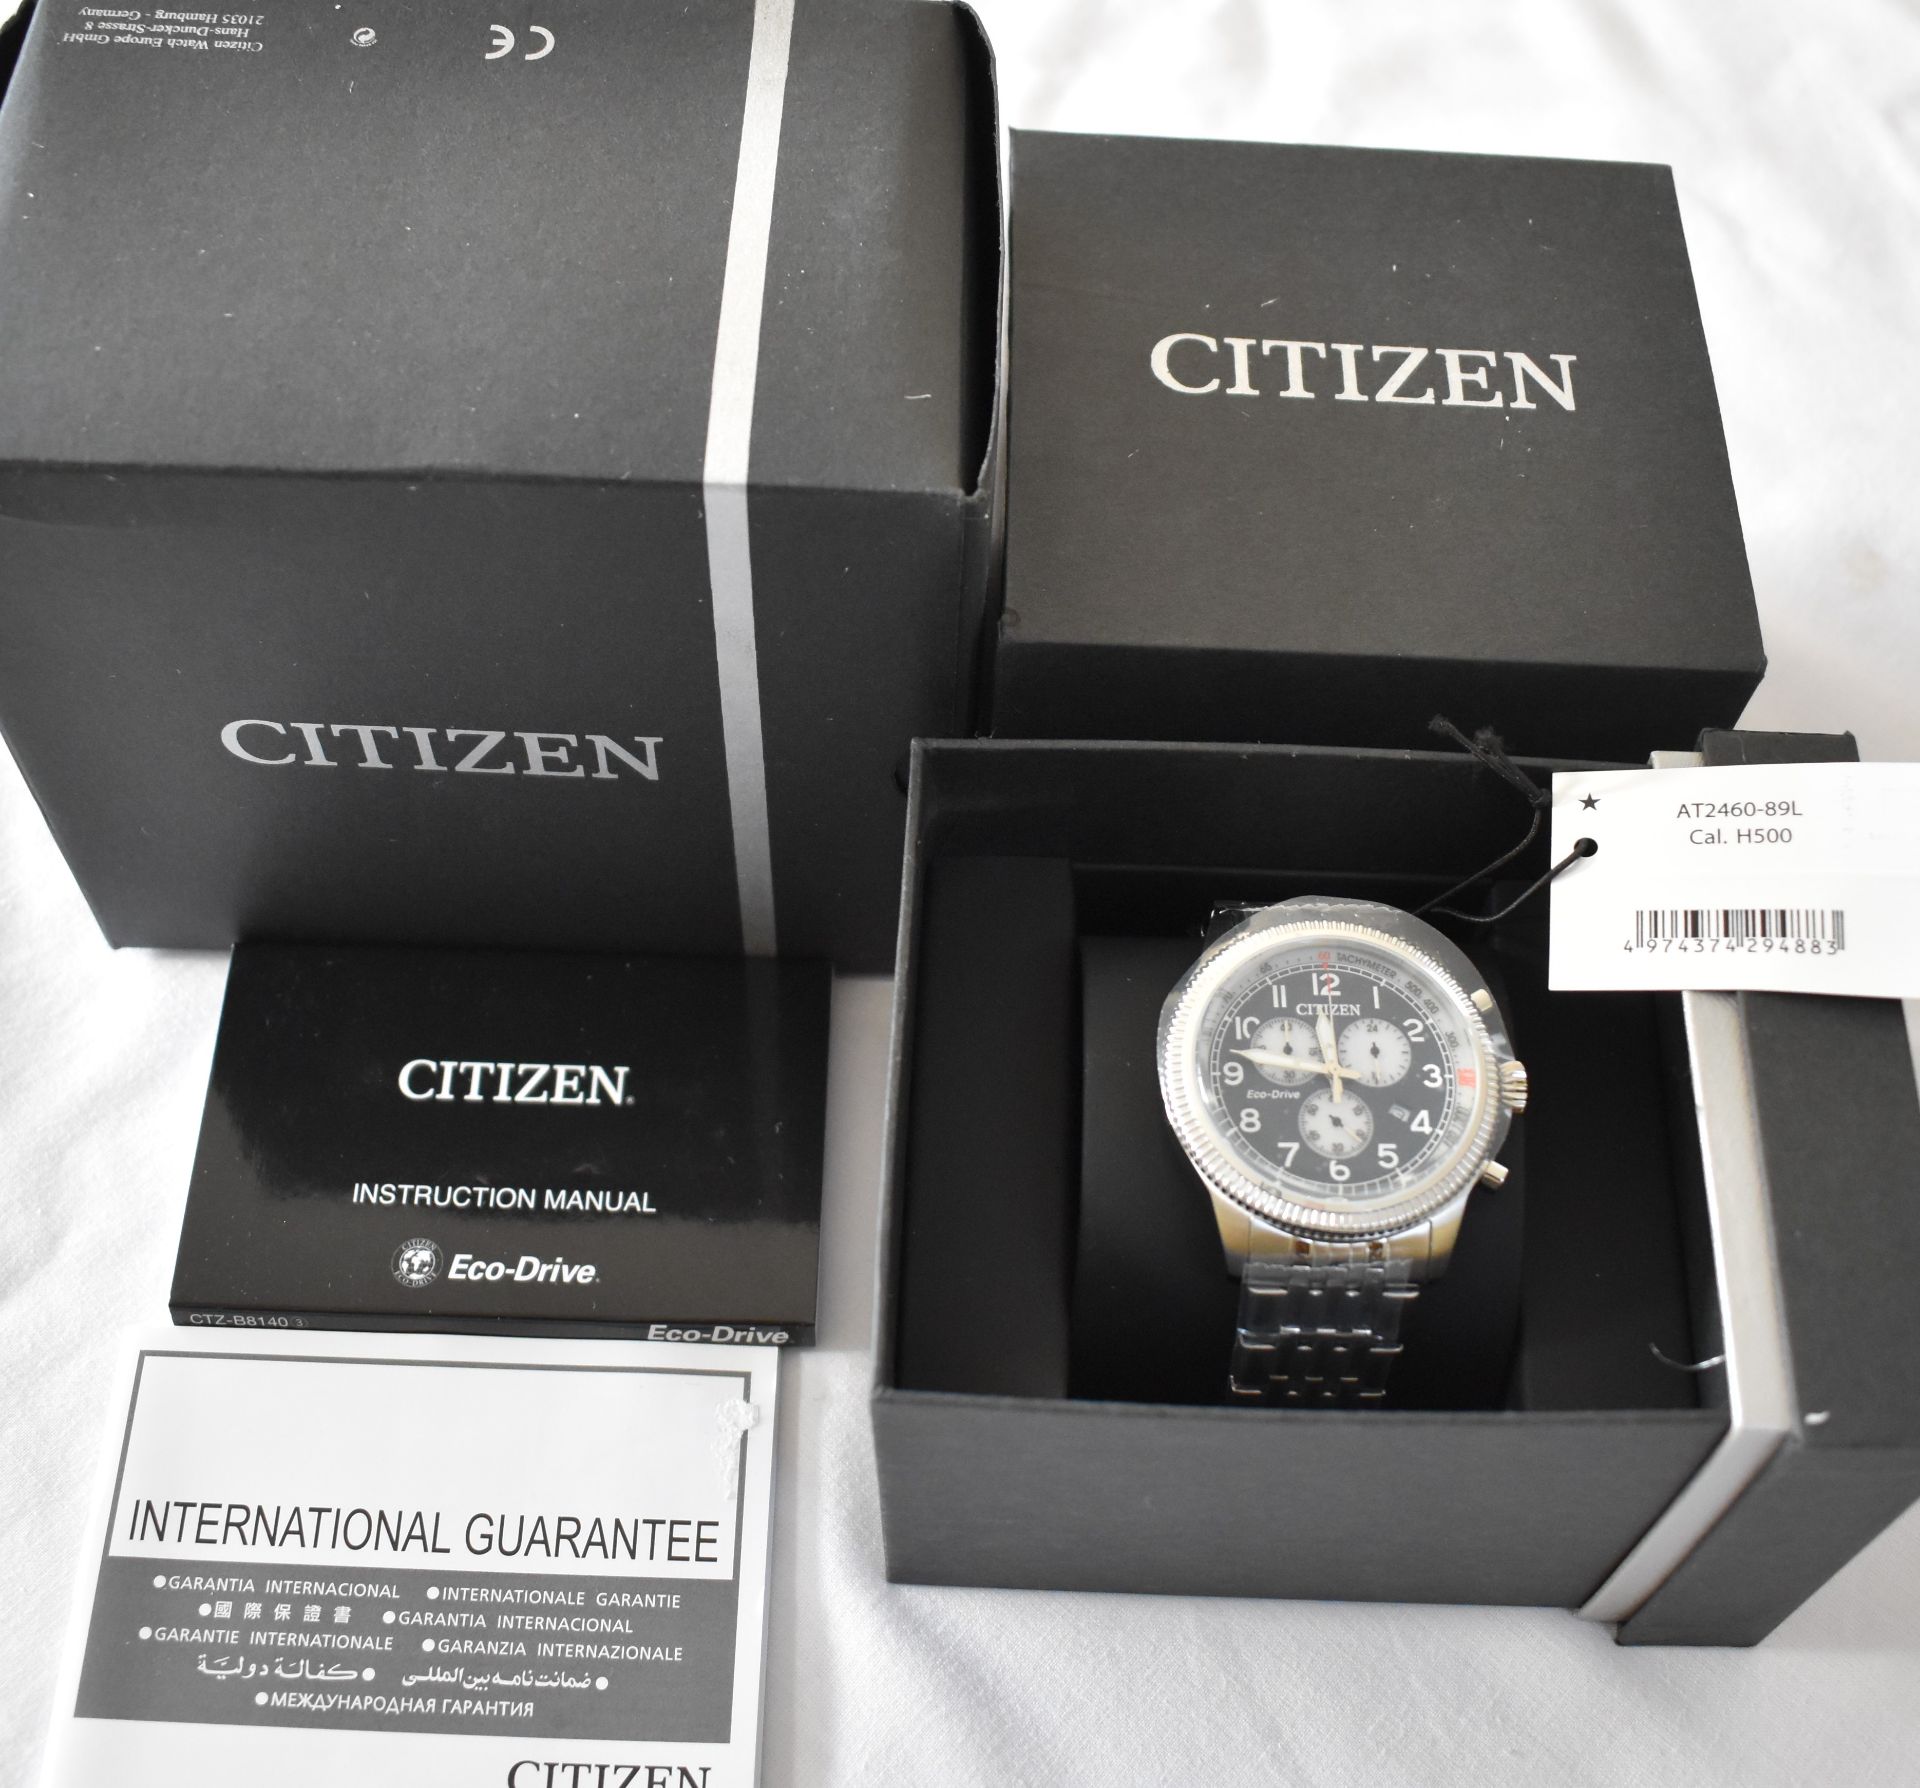 Citizen Men's Watch AT2460-89L - Image 2 of 2